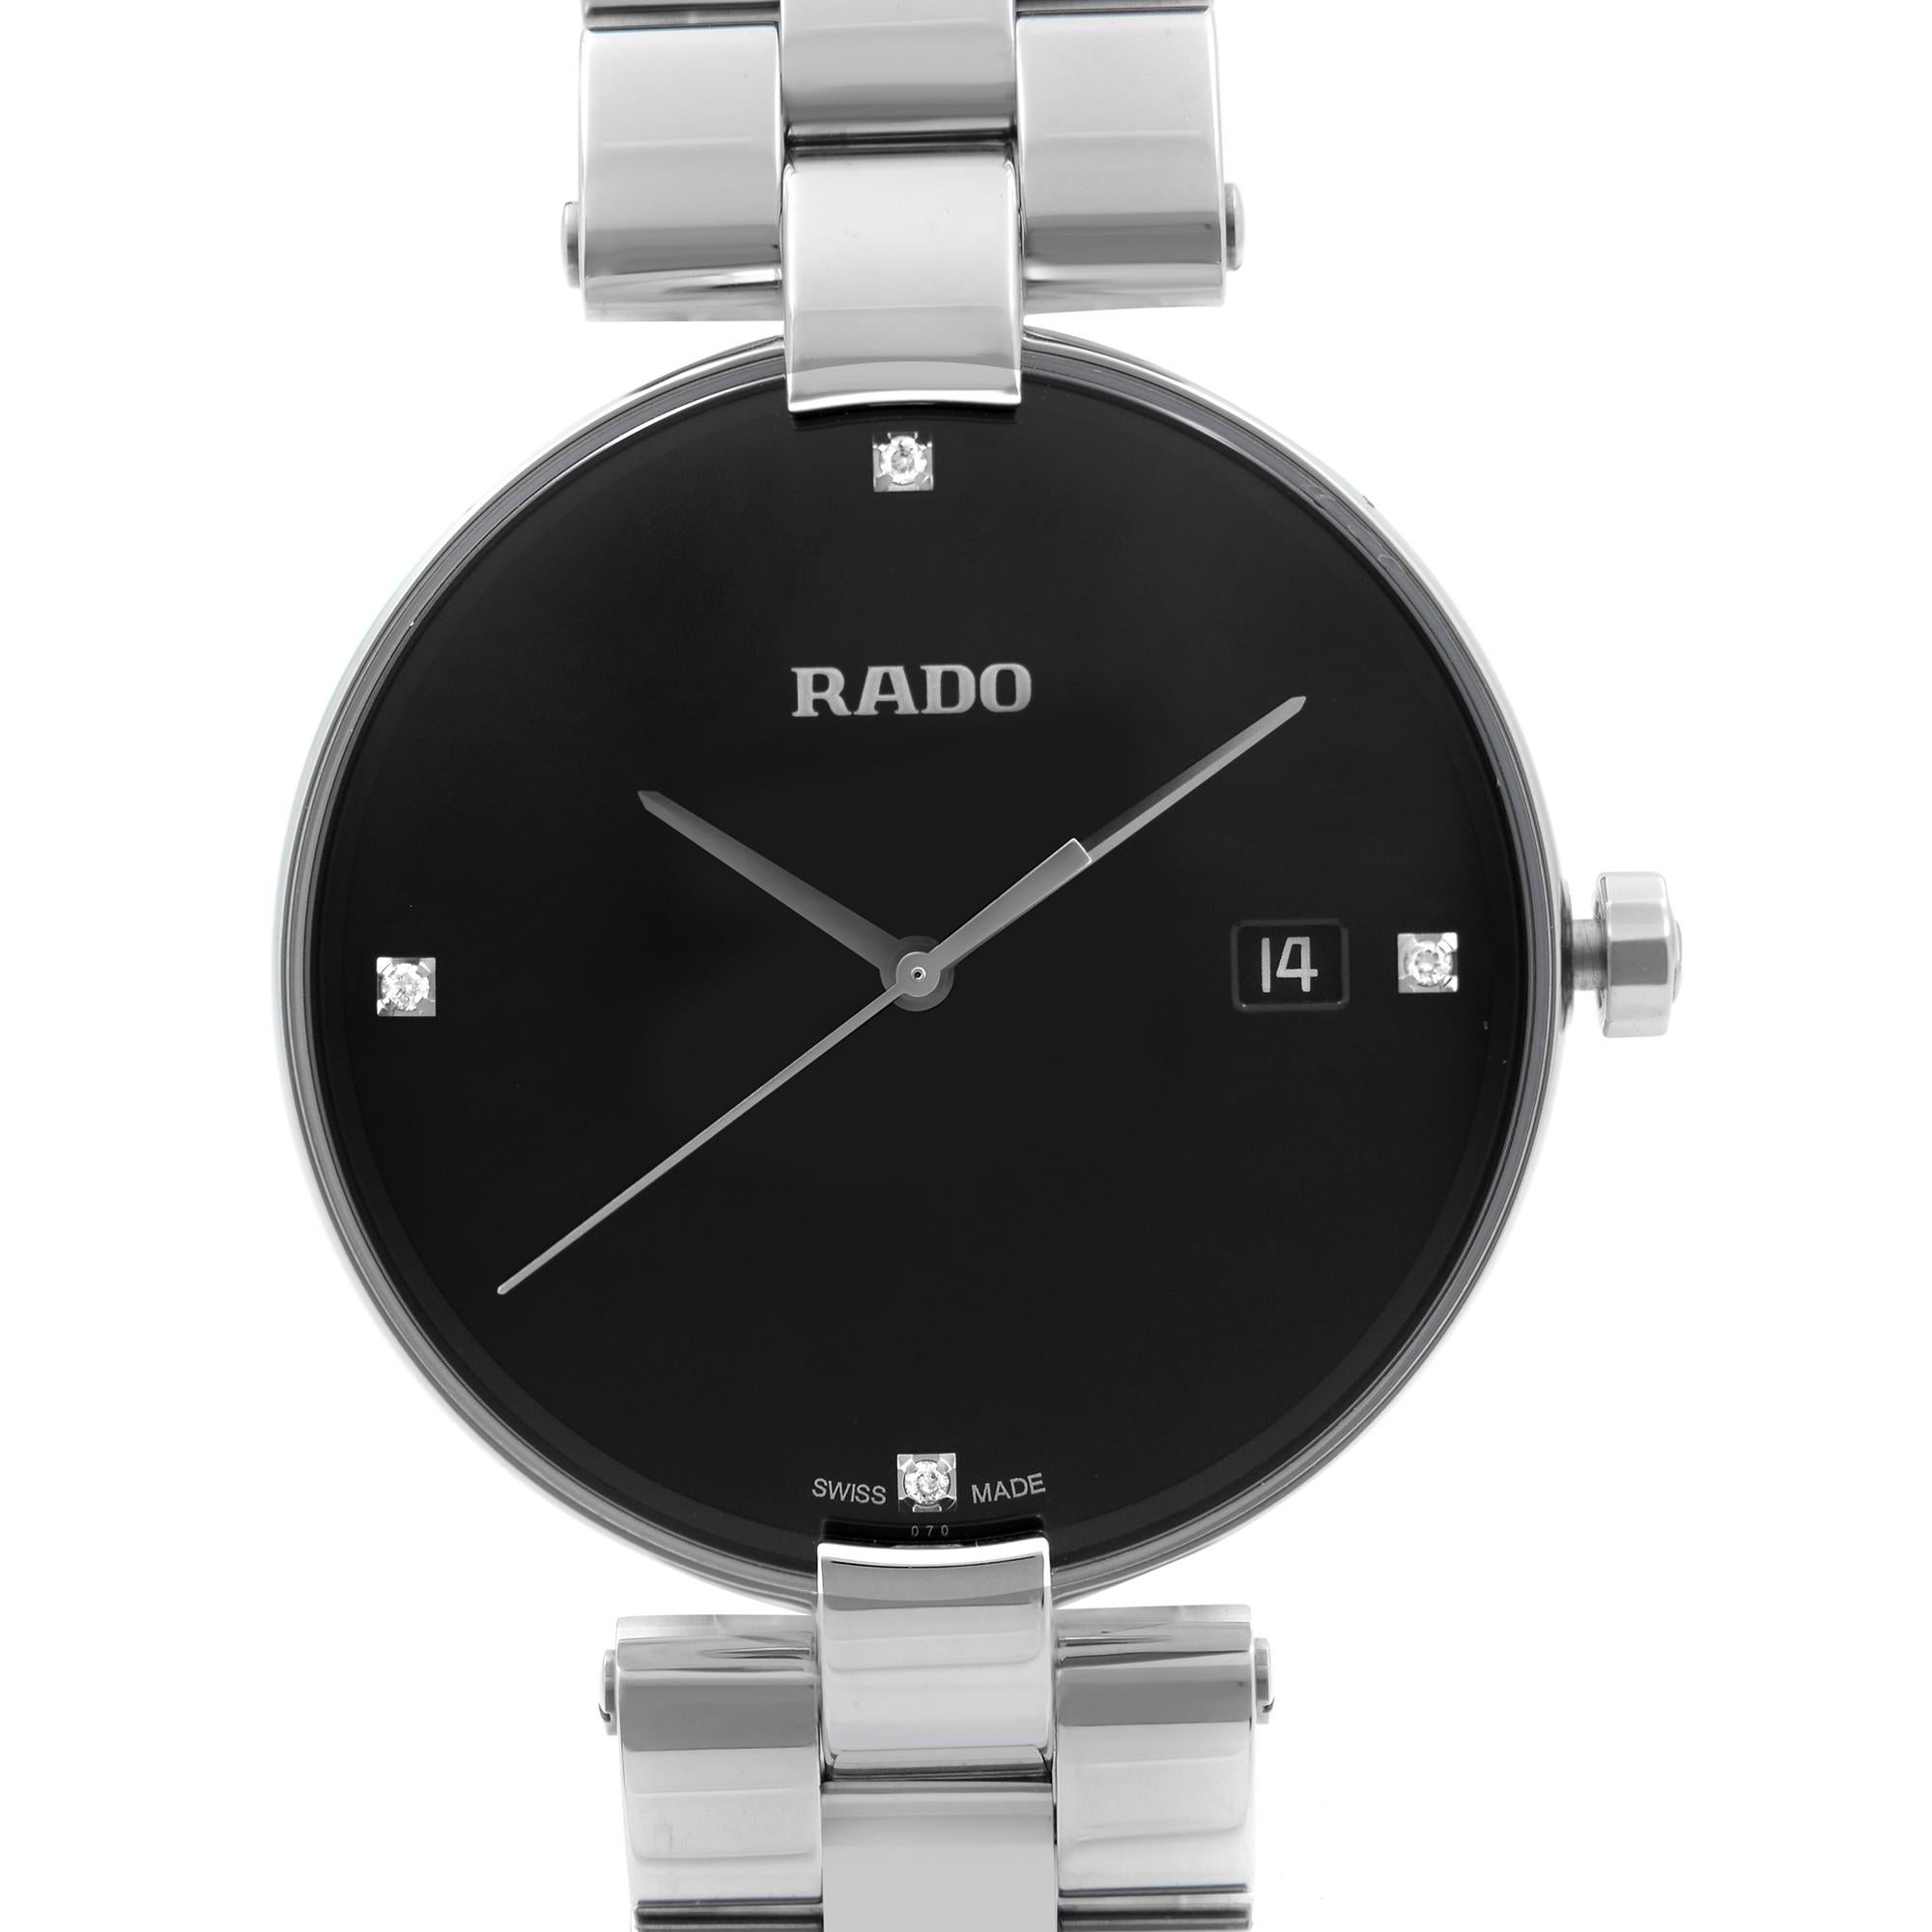 Store Display Model Rado Coupole Stainless Steel Black Diamond Dial Quartz Ladies Watch R22852703. This Beautiful Timepiece Features: Stainless Steel Case and Bracelet, Black Dial with Silver-Tone Hands, and Diamond Hour Markers Set at the 3, 6, 9,